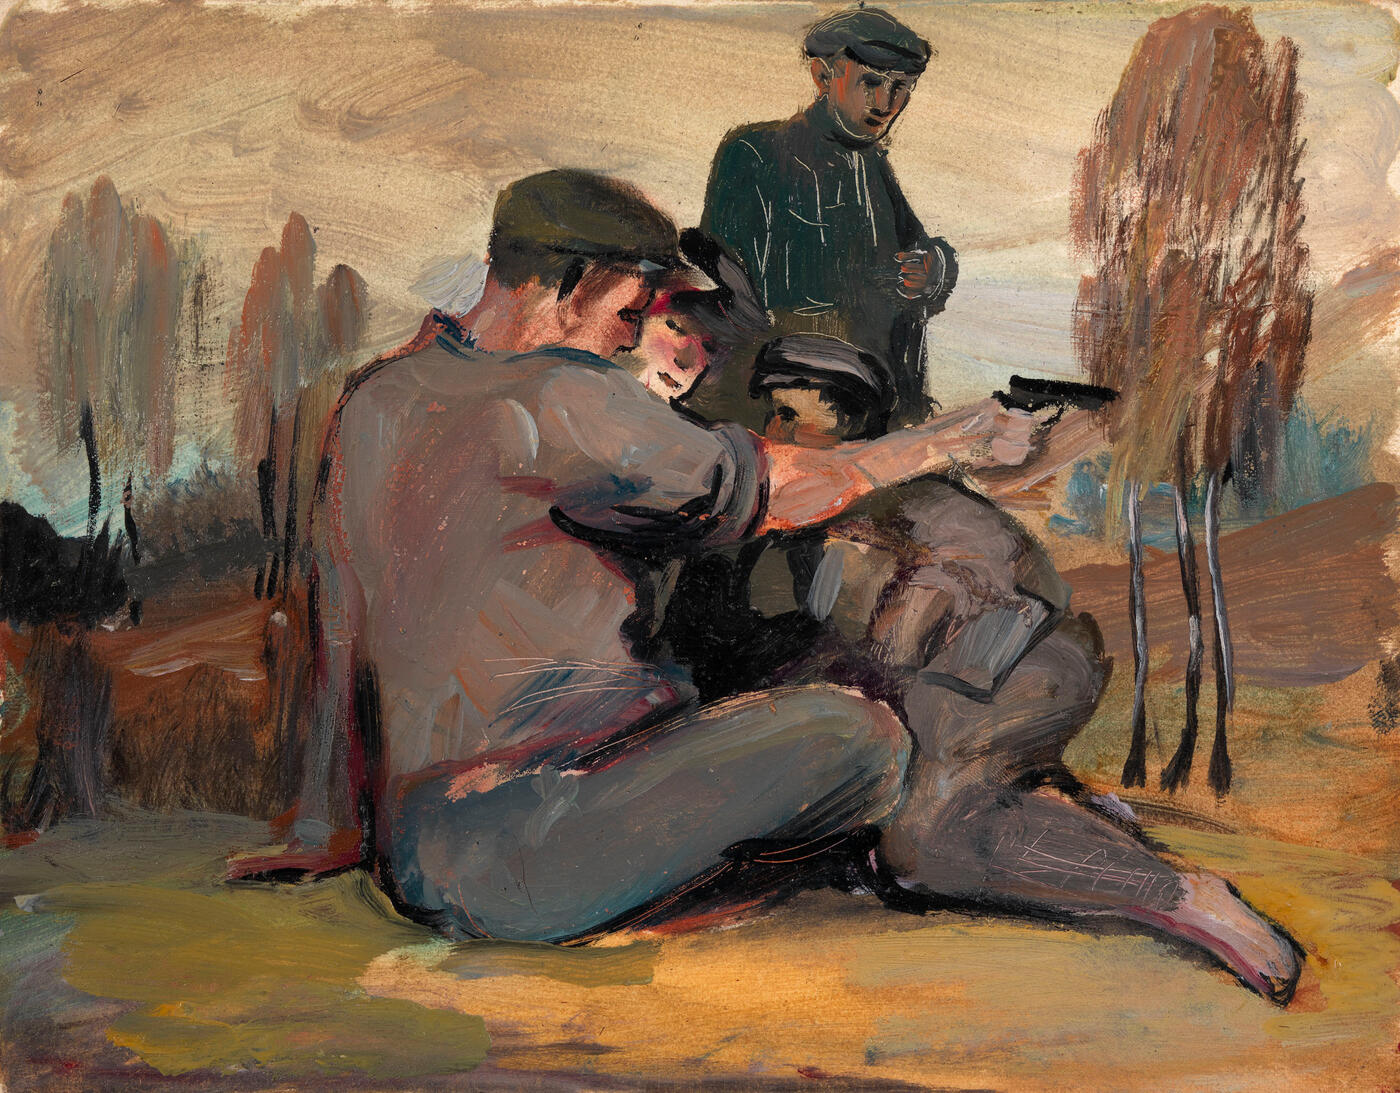 Fishing on the Northern Sosva River, Hunters at Rest and Kindling a Fire, from the "Pripolyarnyi Ural" Series